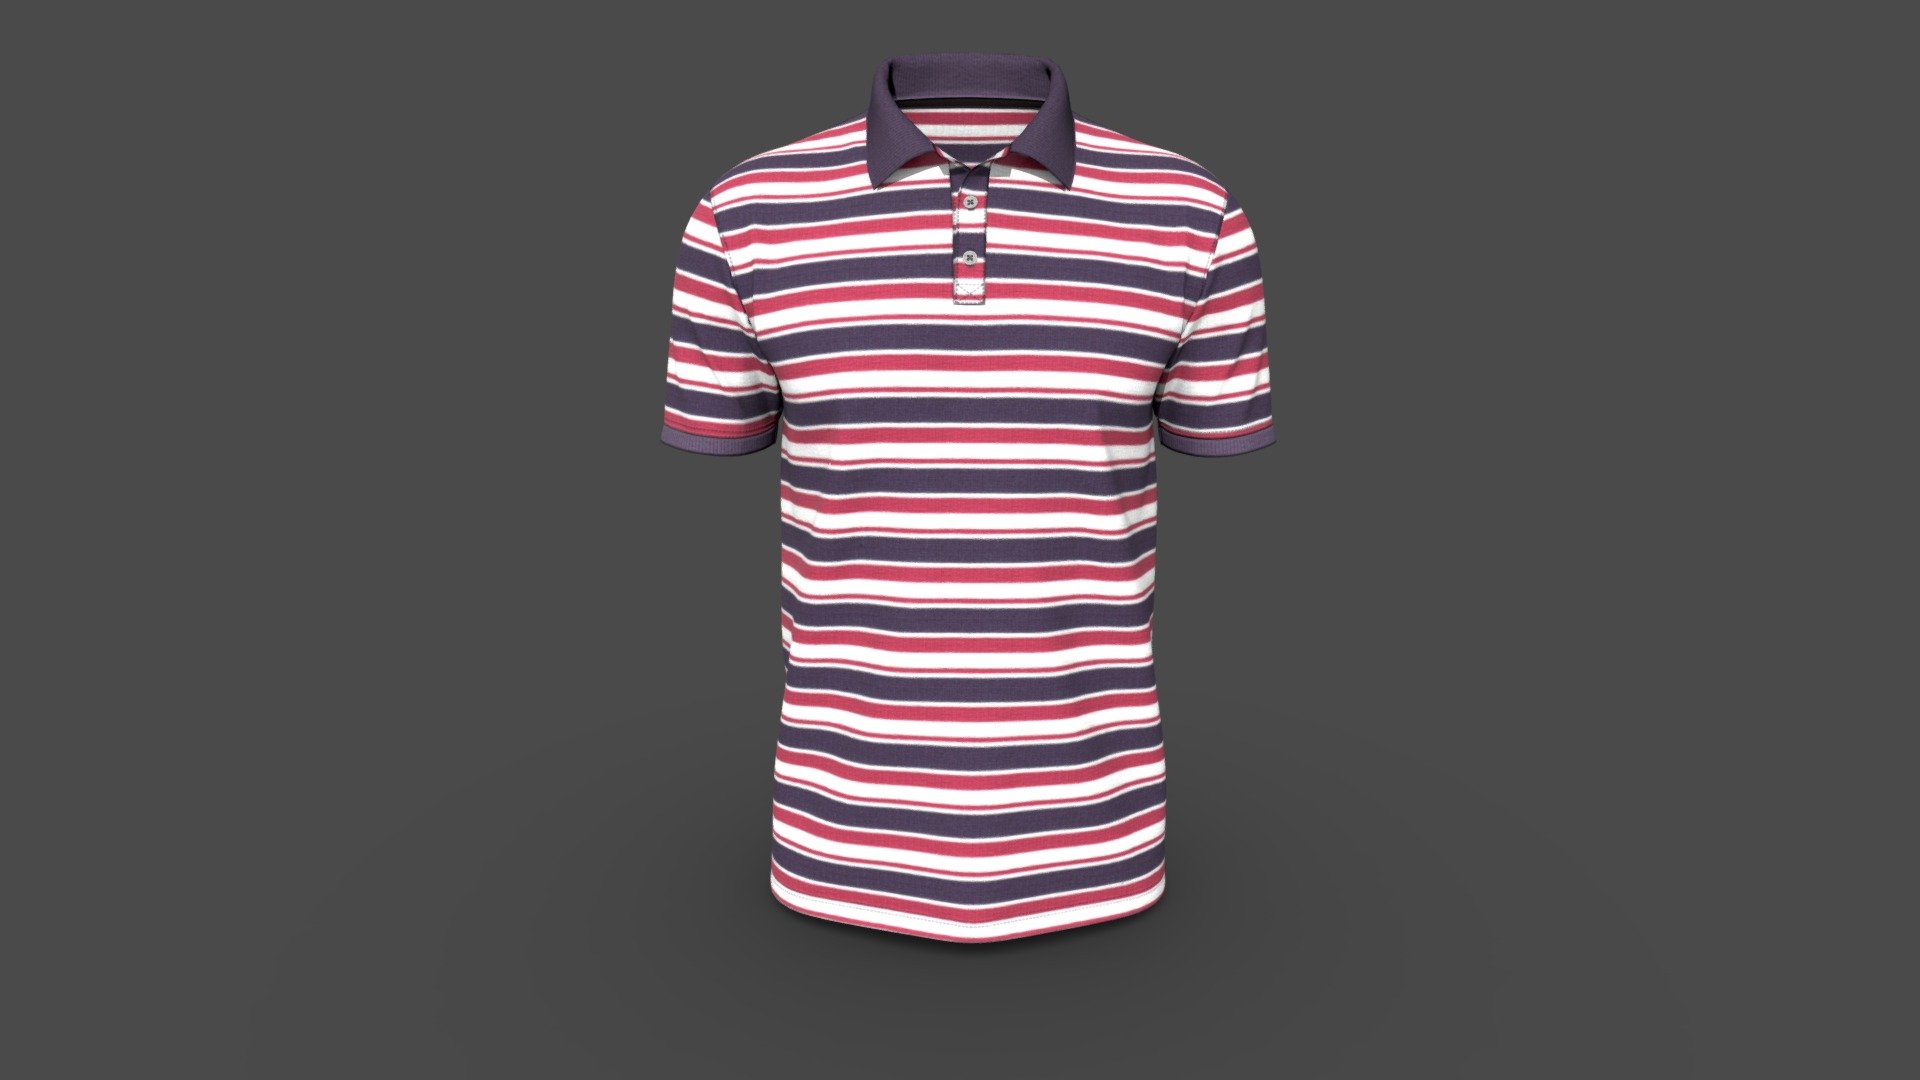 Men Classic Strip Polo Shirt
Version V1.0

Realistic high detailed Mens Cotton Poloshirt with high resolution textures. Model created by our unique processing &amp; Optimized for Web and AR / VR. 

Features

Optimized &amp; NON-Optimized obj model with 4K texture included




Optimized for AR/VR/MR

4K &amp; 2K fabric texture and details

Optimized model is 1.59MB

NON-Optimized model is 12.8MB

Knit fabric texture and print details included

GLB file in 2k texture size is 4.89MB

GLB file in 4k texture size is 20.1MB  (Game &amp; Animation Ready)

Suitable for web application configurator development.

Fully unwrap UV

The model has 1 material

Includes high detailed normal map

Unit measurment was inch

Triangular Mesh with 13.9k Vertices

Texture map: Base color, OcclusionRoughnessMetallic(ORM), Normal

Tpose  available on request

For more details or custom order send email: hello@binarycloth.com


Website:binarycloth.com - Men Classic Strip Polo Shirt - Buy Royalty Free 3D model by BINARYCLOTH (@binaryclothofficial) 3d model